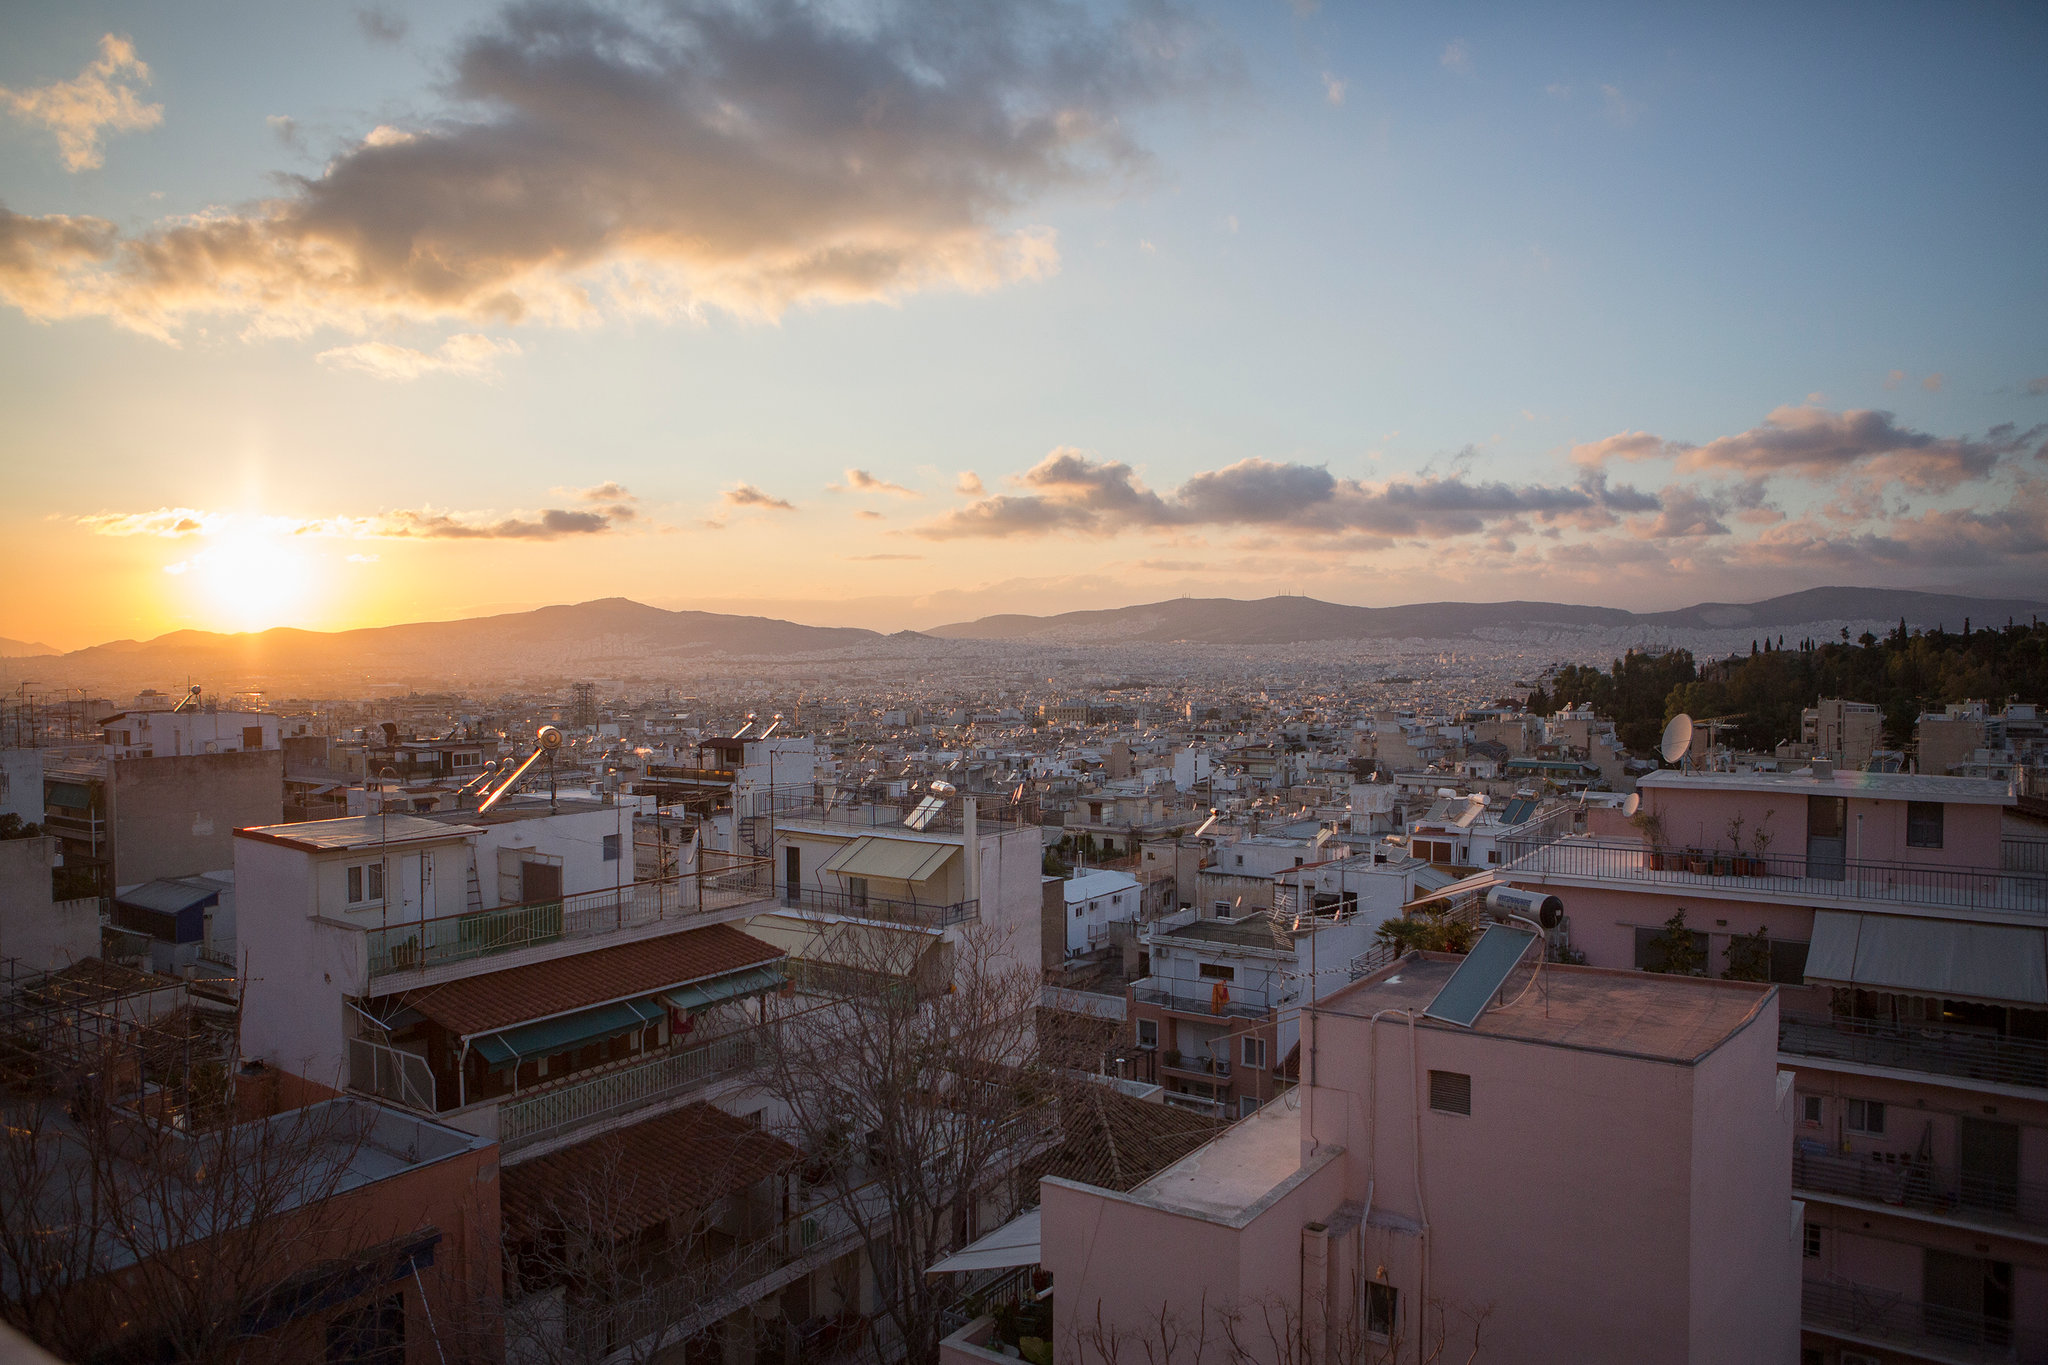 In Greece, an Economic Revival Fueled by ‘Golden Visas’ and Tourism